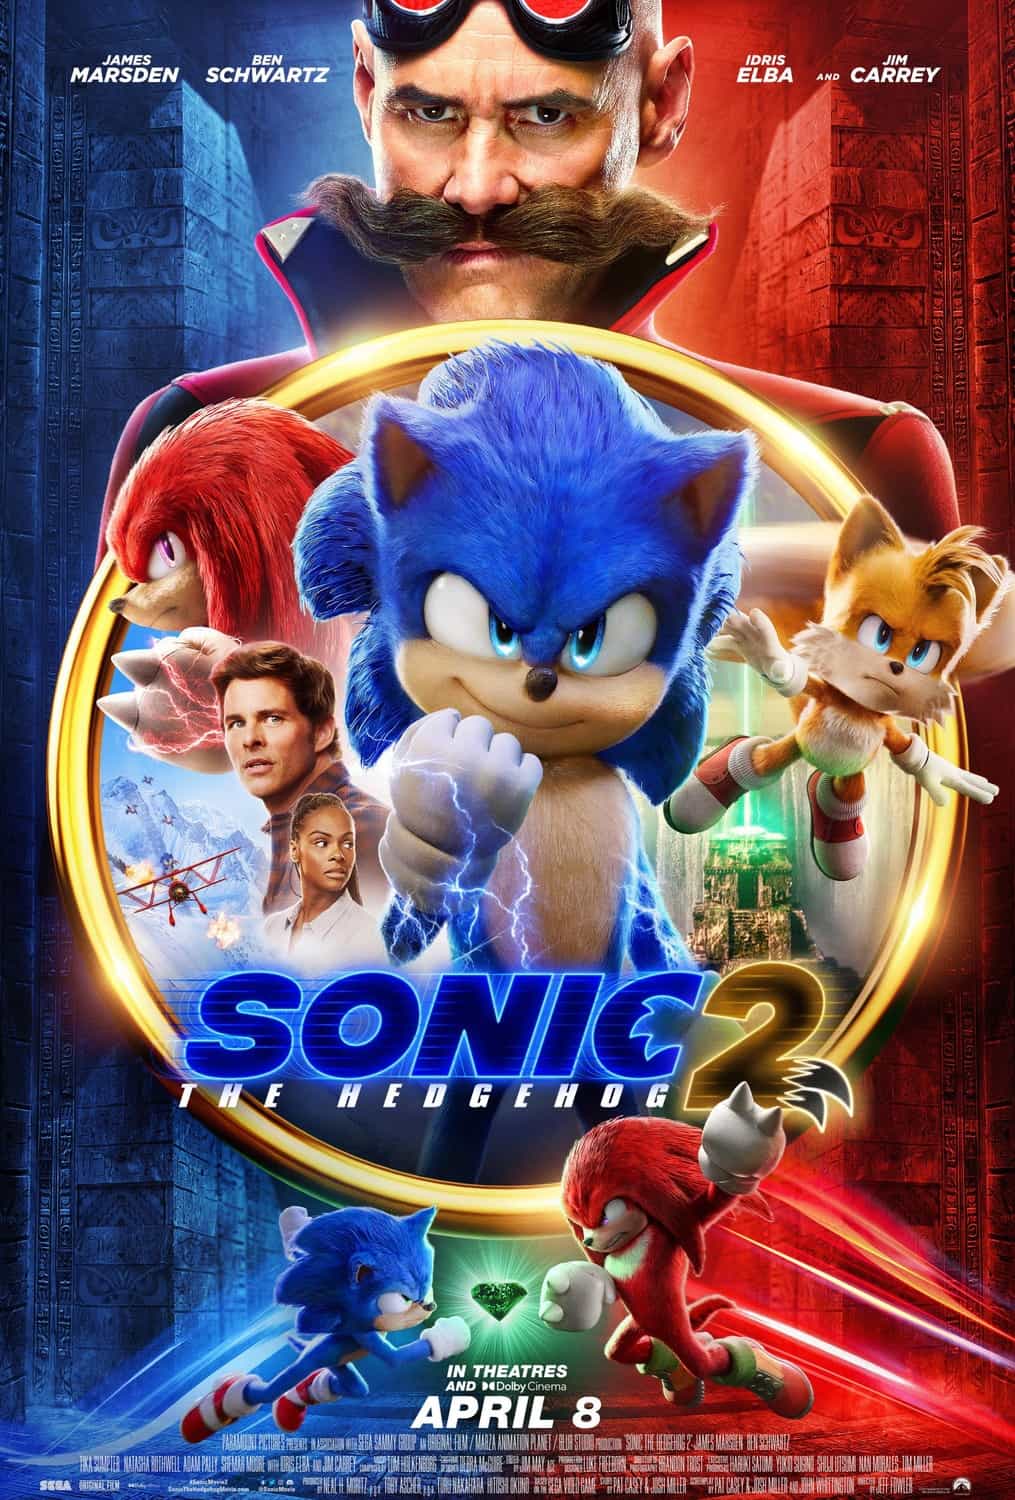 UK Box Office Weekend Report 1st - 3rd April 2022: In a battle of the blockbusters Sonic wins the box office over Morbius in the UK with a £5 Million debut